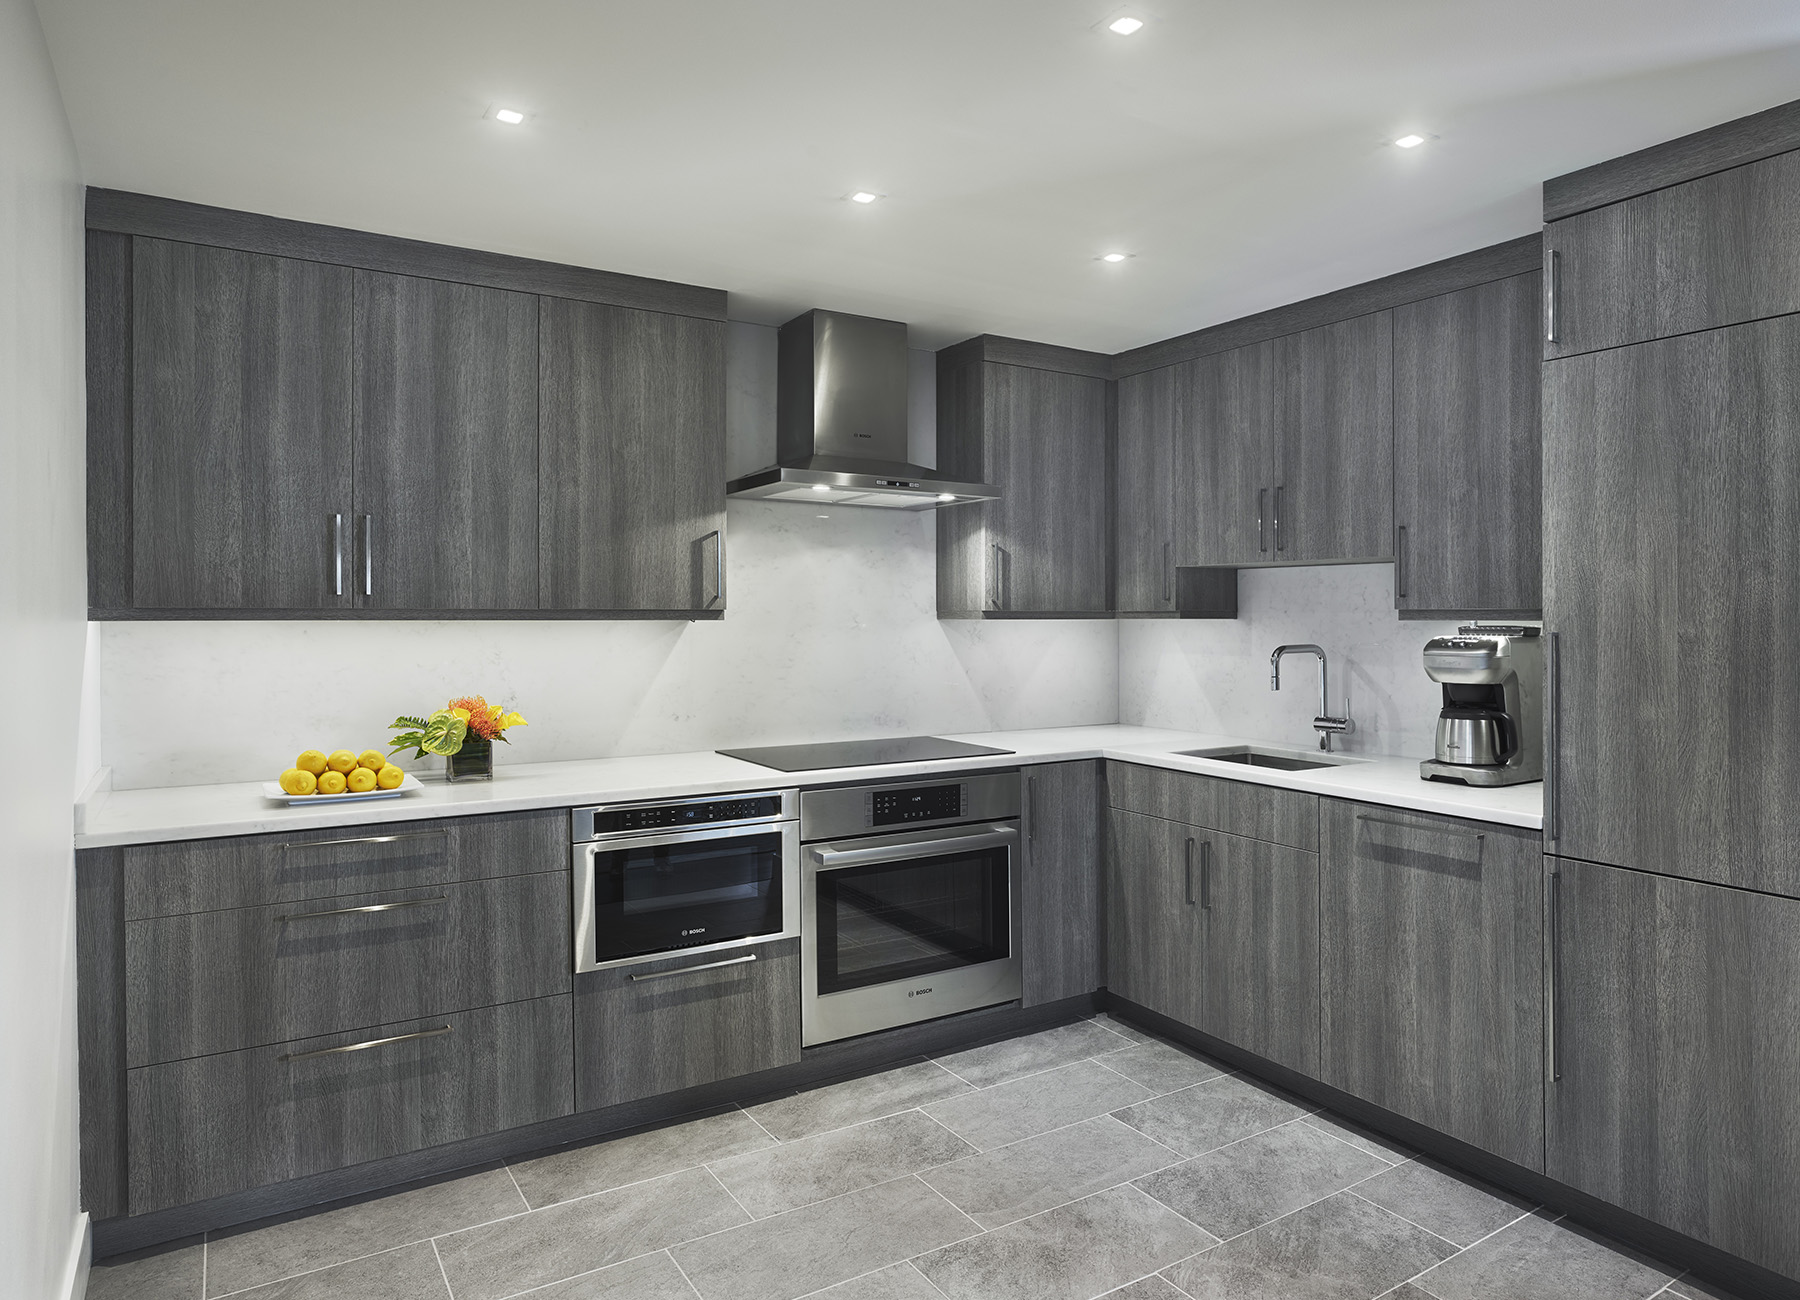 The Franklin Residences large Philadelphia penthouse kitchen with gray wood cabinets and white countertops